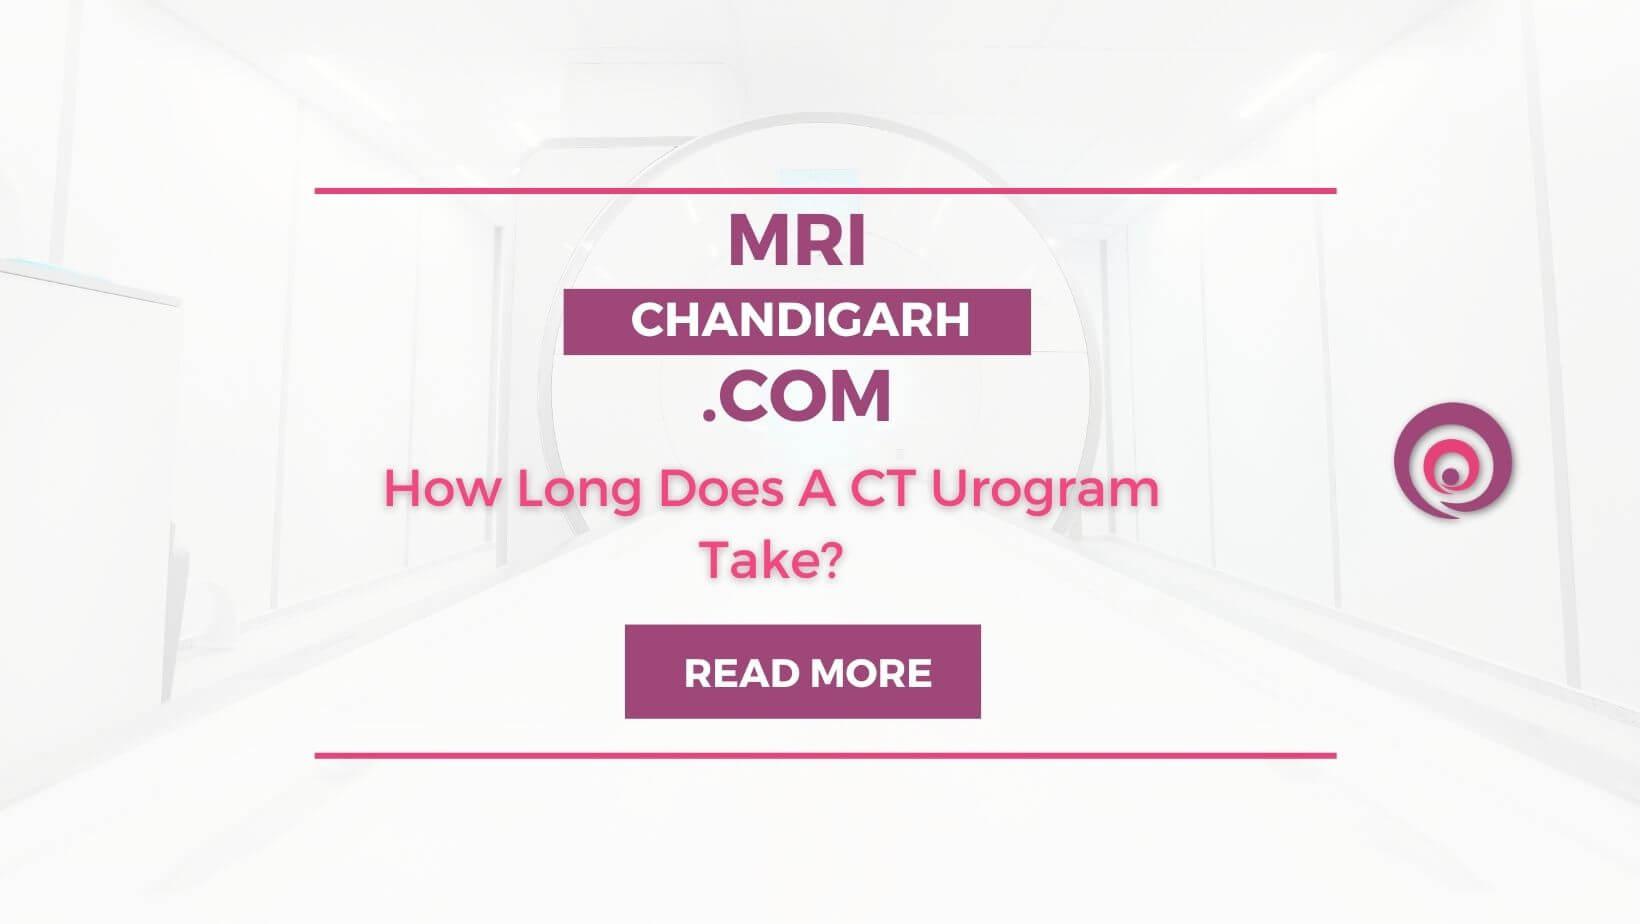 How Long Does A CT Urogram Take?